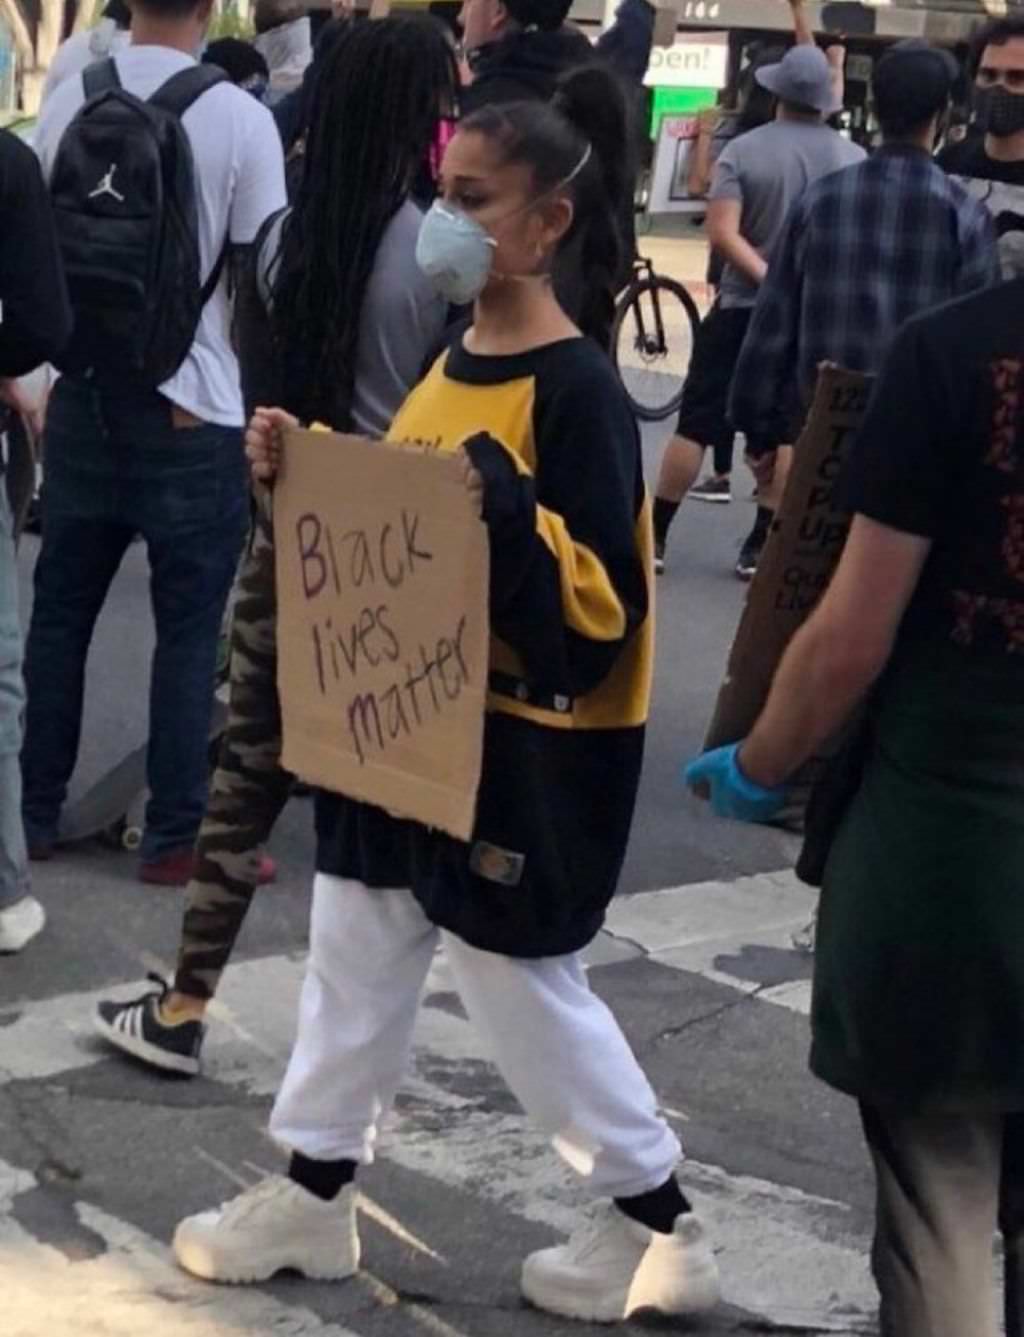 Ariana Grande Supports Black Lives Matter as she Marches in LA